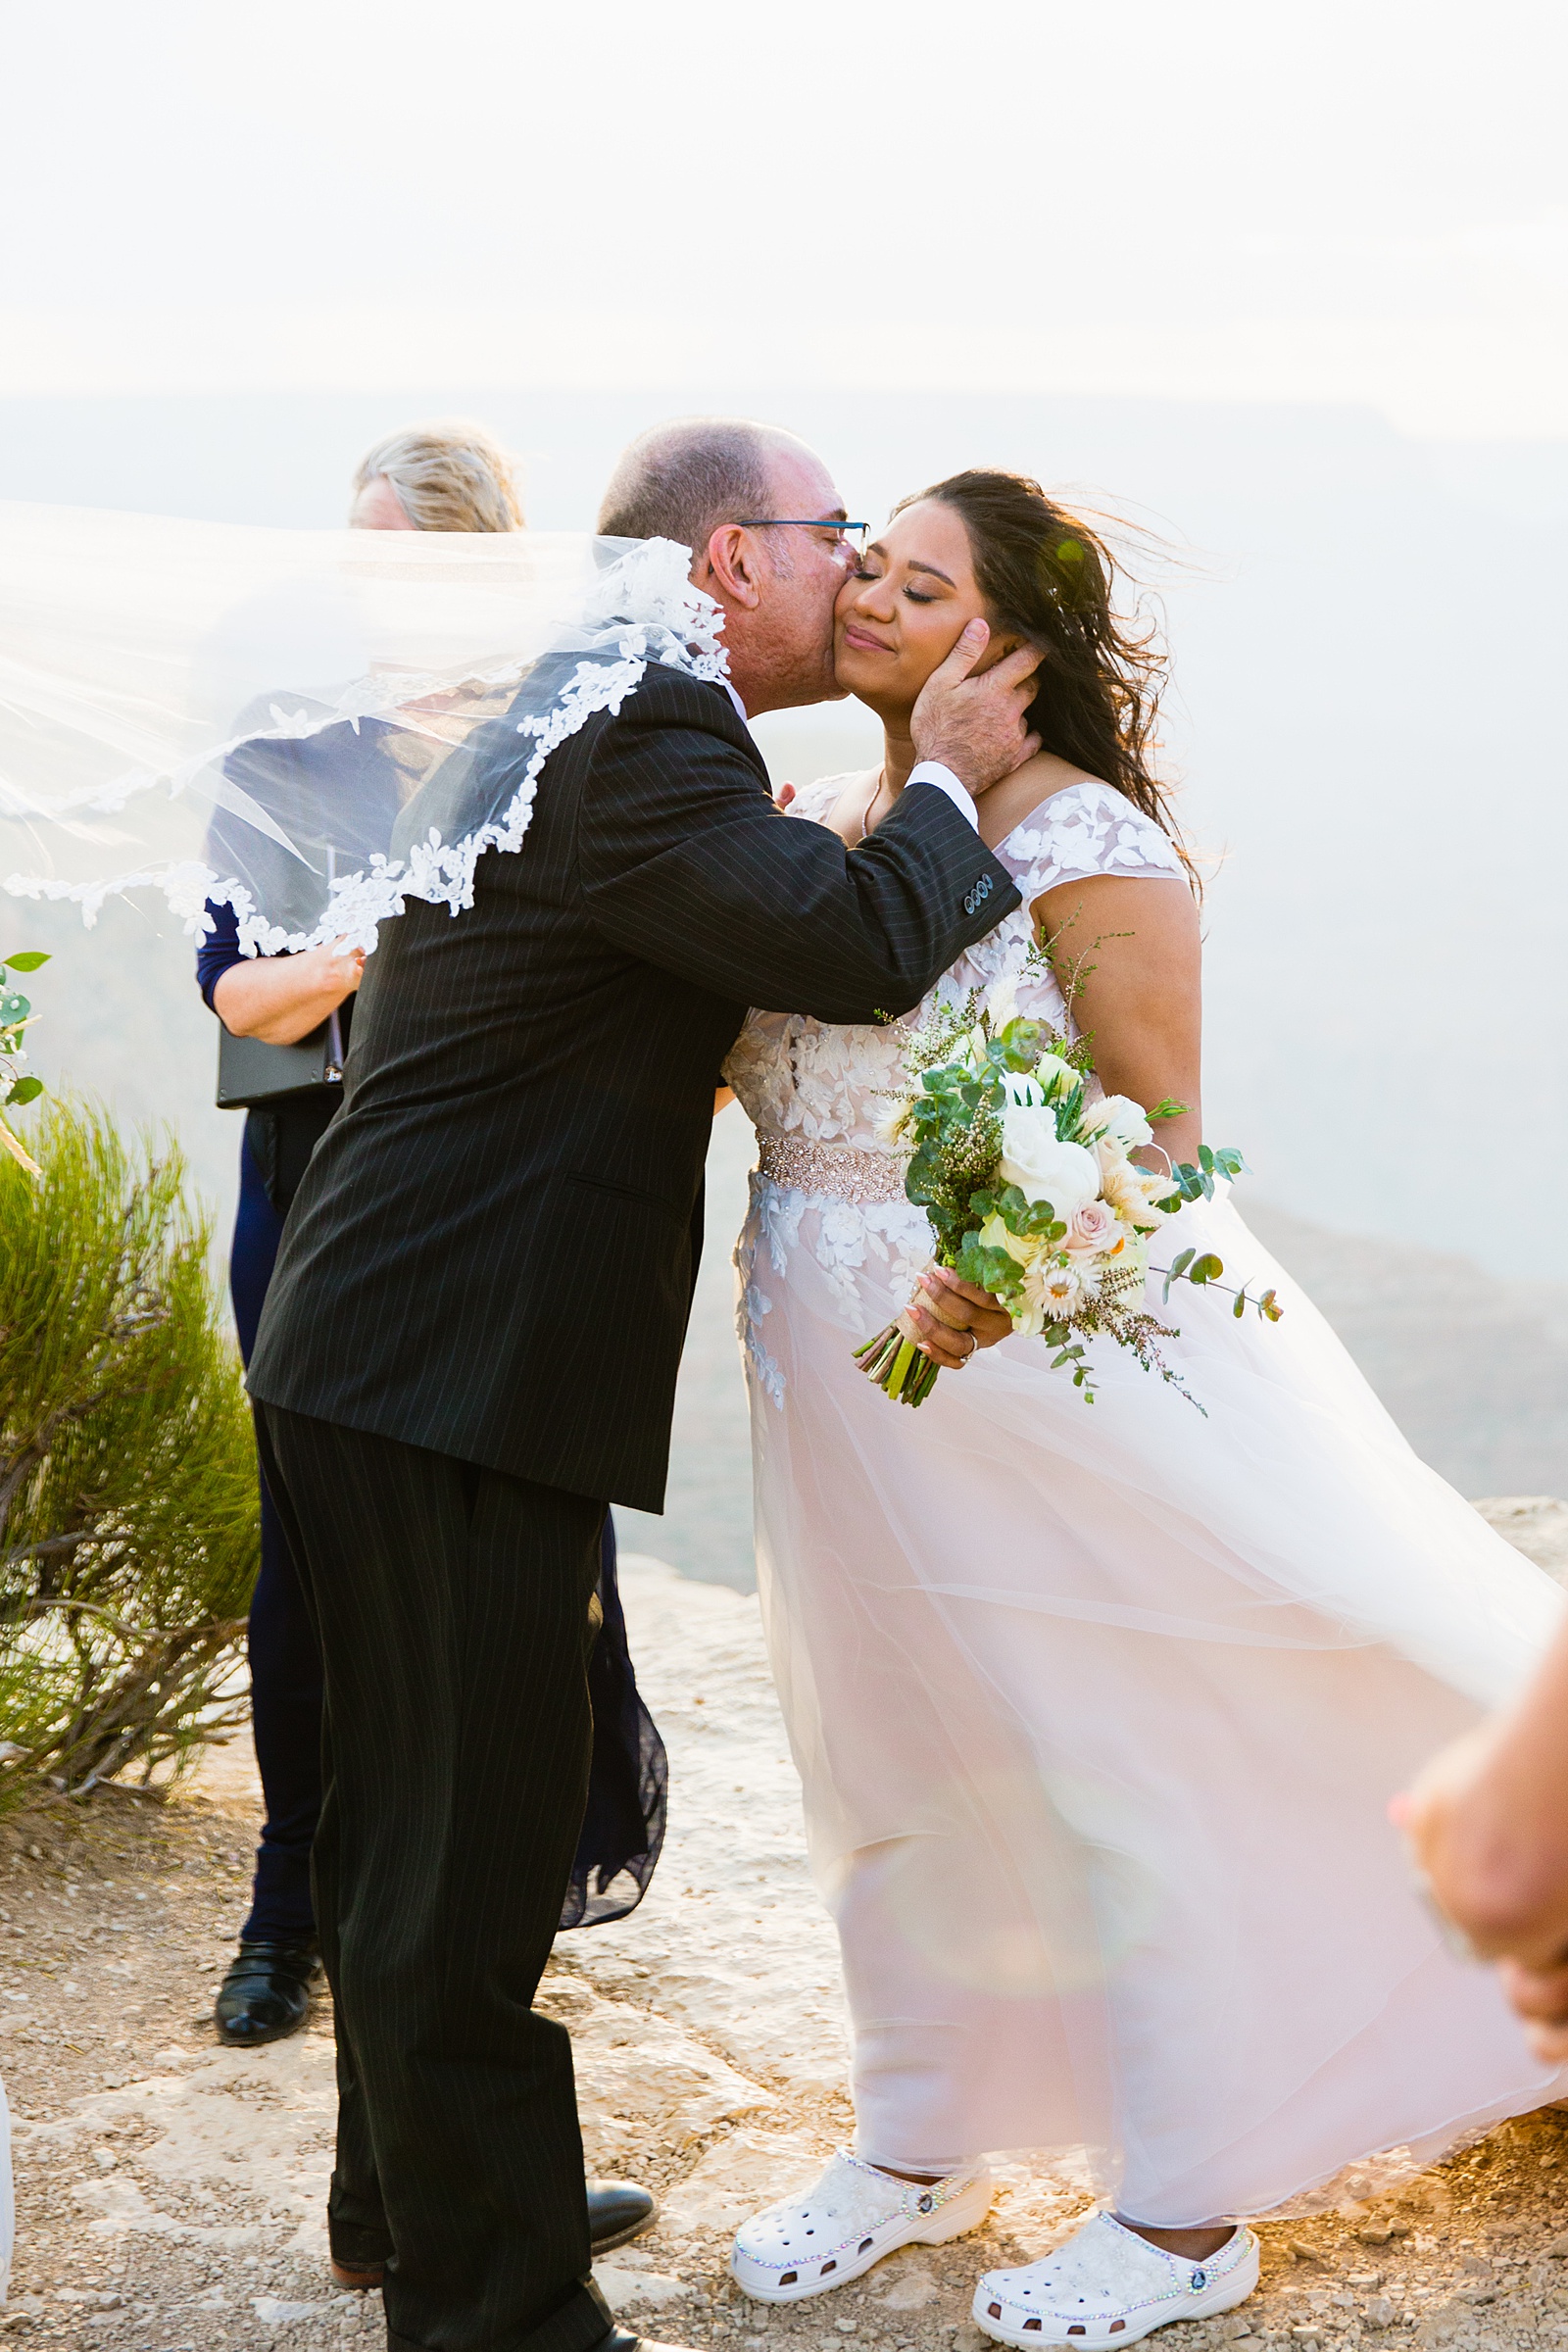 Bride sharing a moment with her father in law by Grand Canyon Elopement photographer PMA Photography.